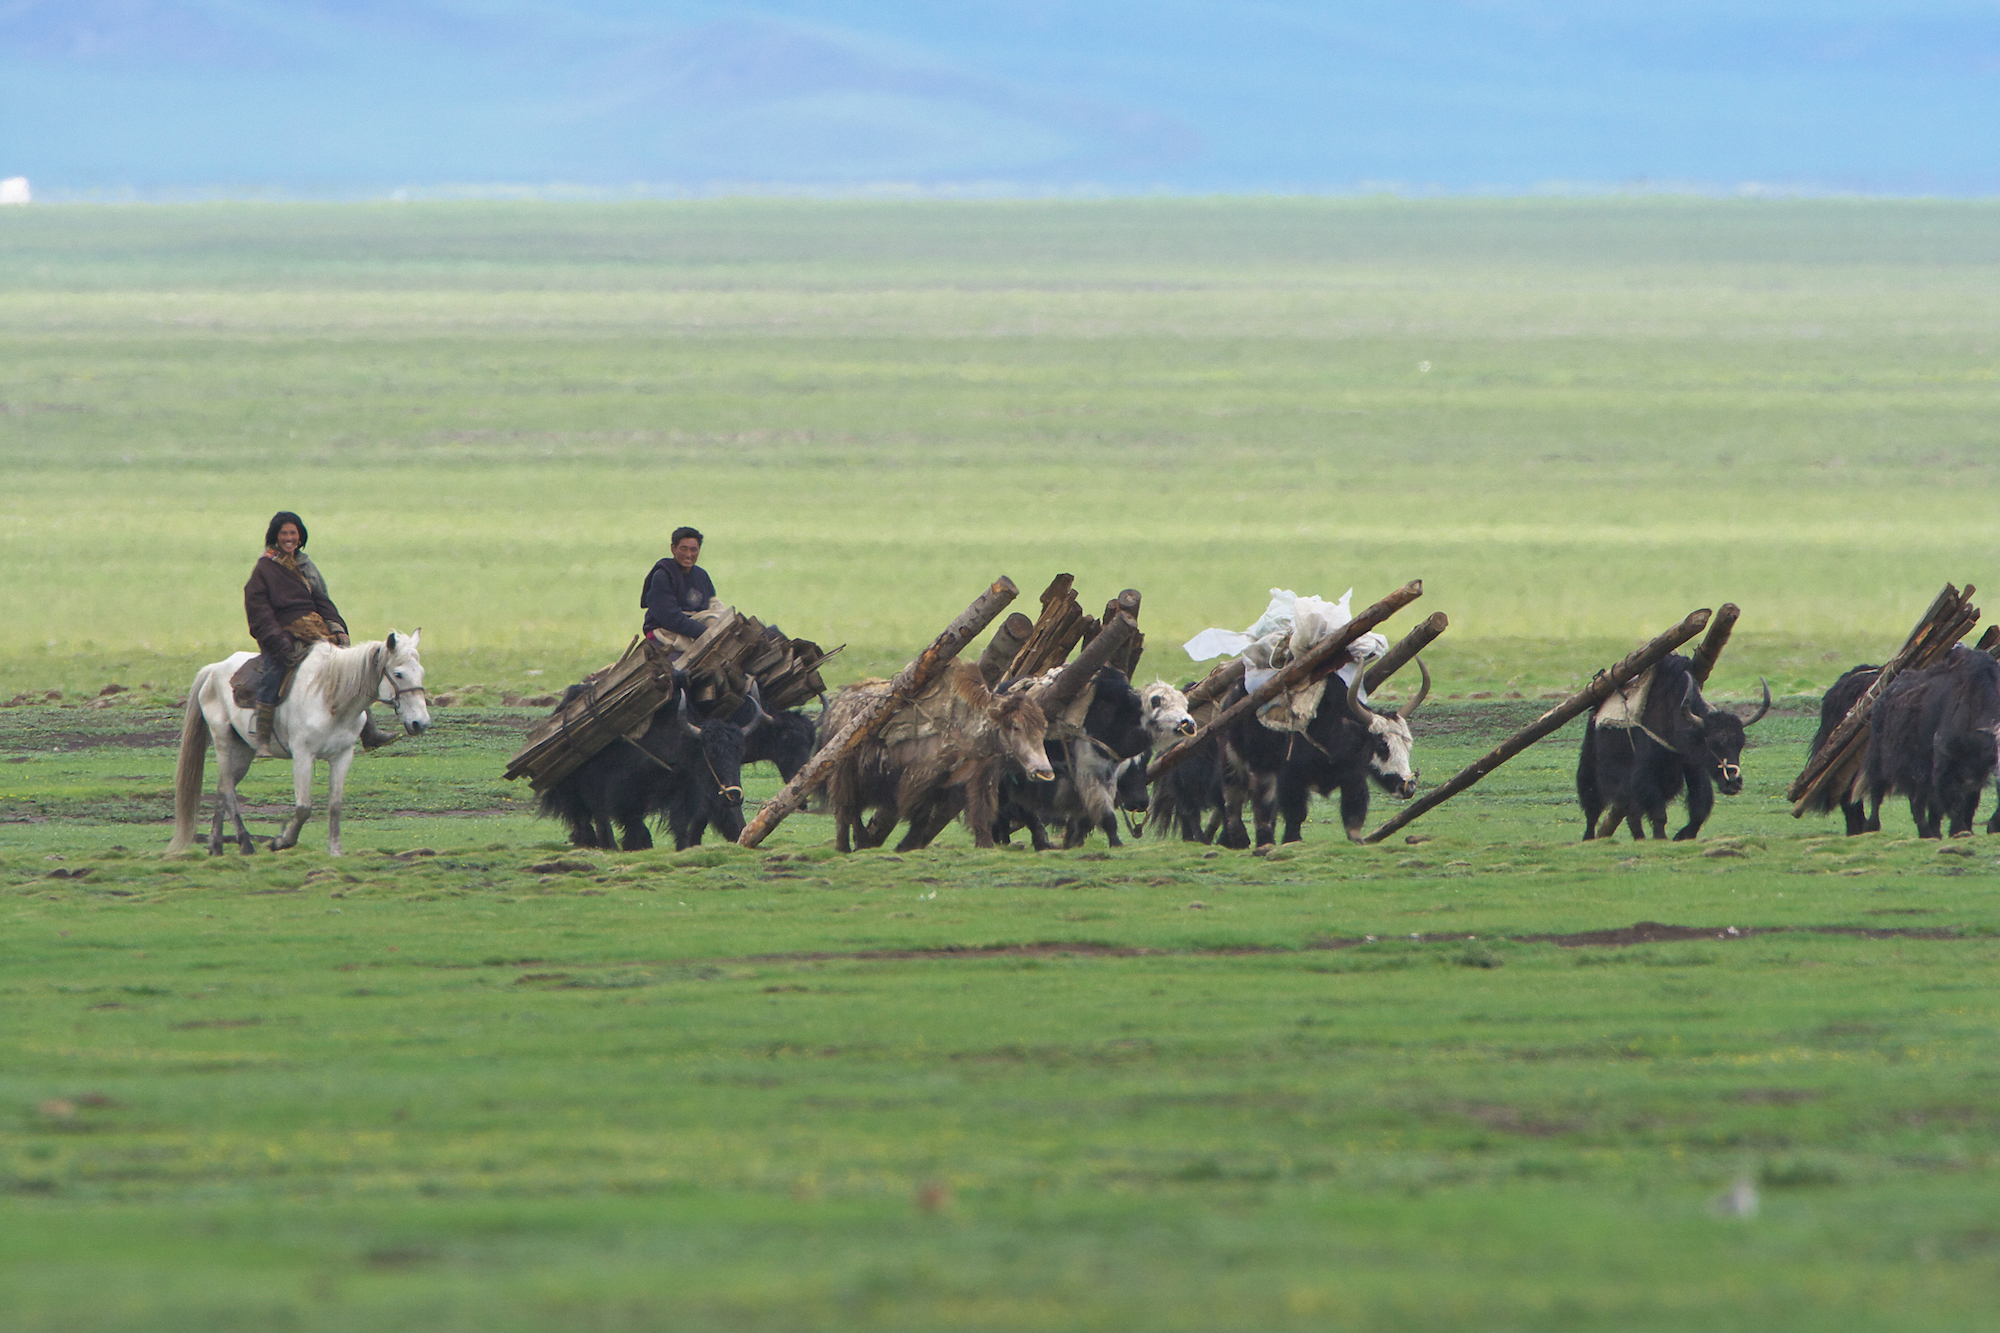 animals in Zoige or Ruoergai wetlands in the Tibetan plateau of Sichuan province in western China